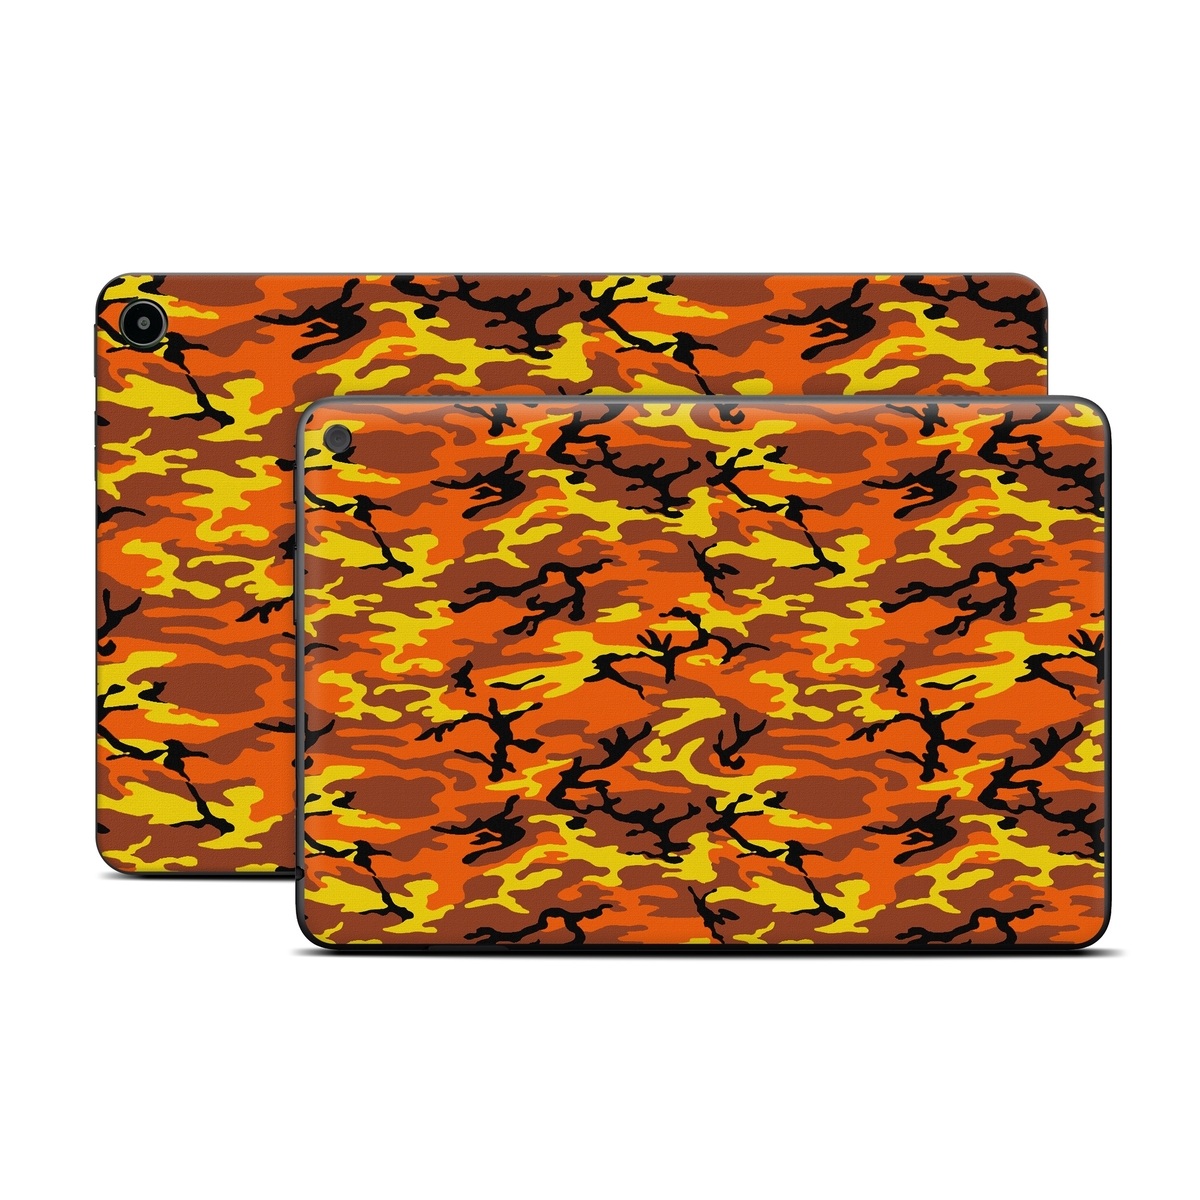 Amazon Fire Tablet Series Skin Skin design of Military camouflage, Orange, Pattern, Camouflage, Yellow, Brown, Uniform, Design, Tree, Wildlife, with red, green, black colors